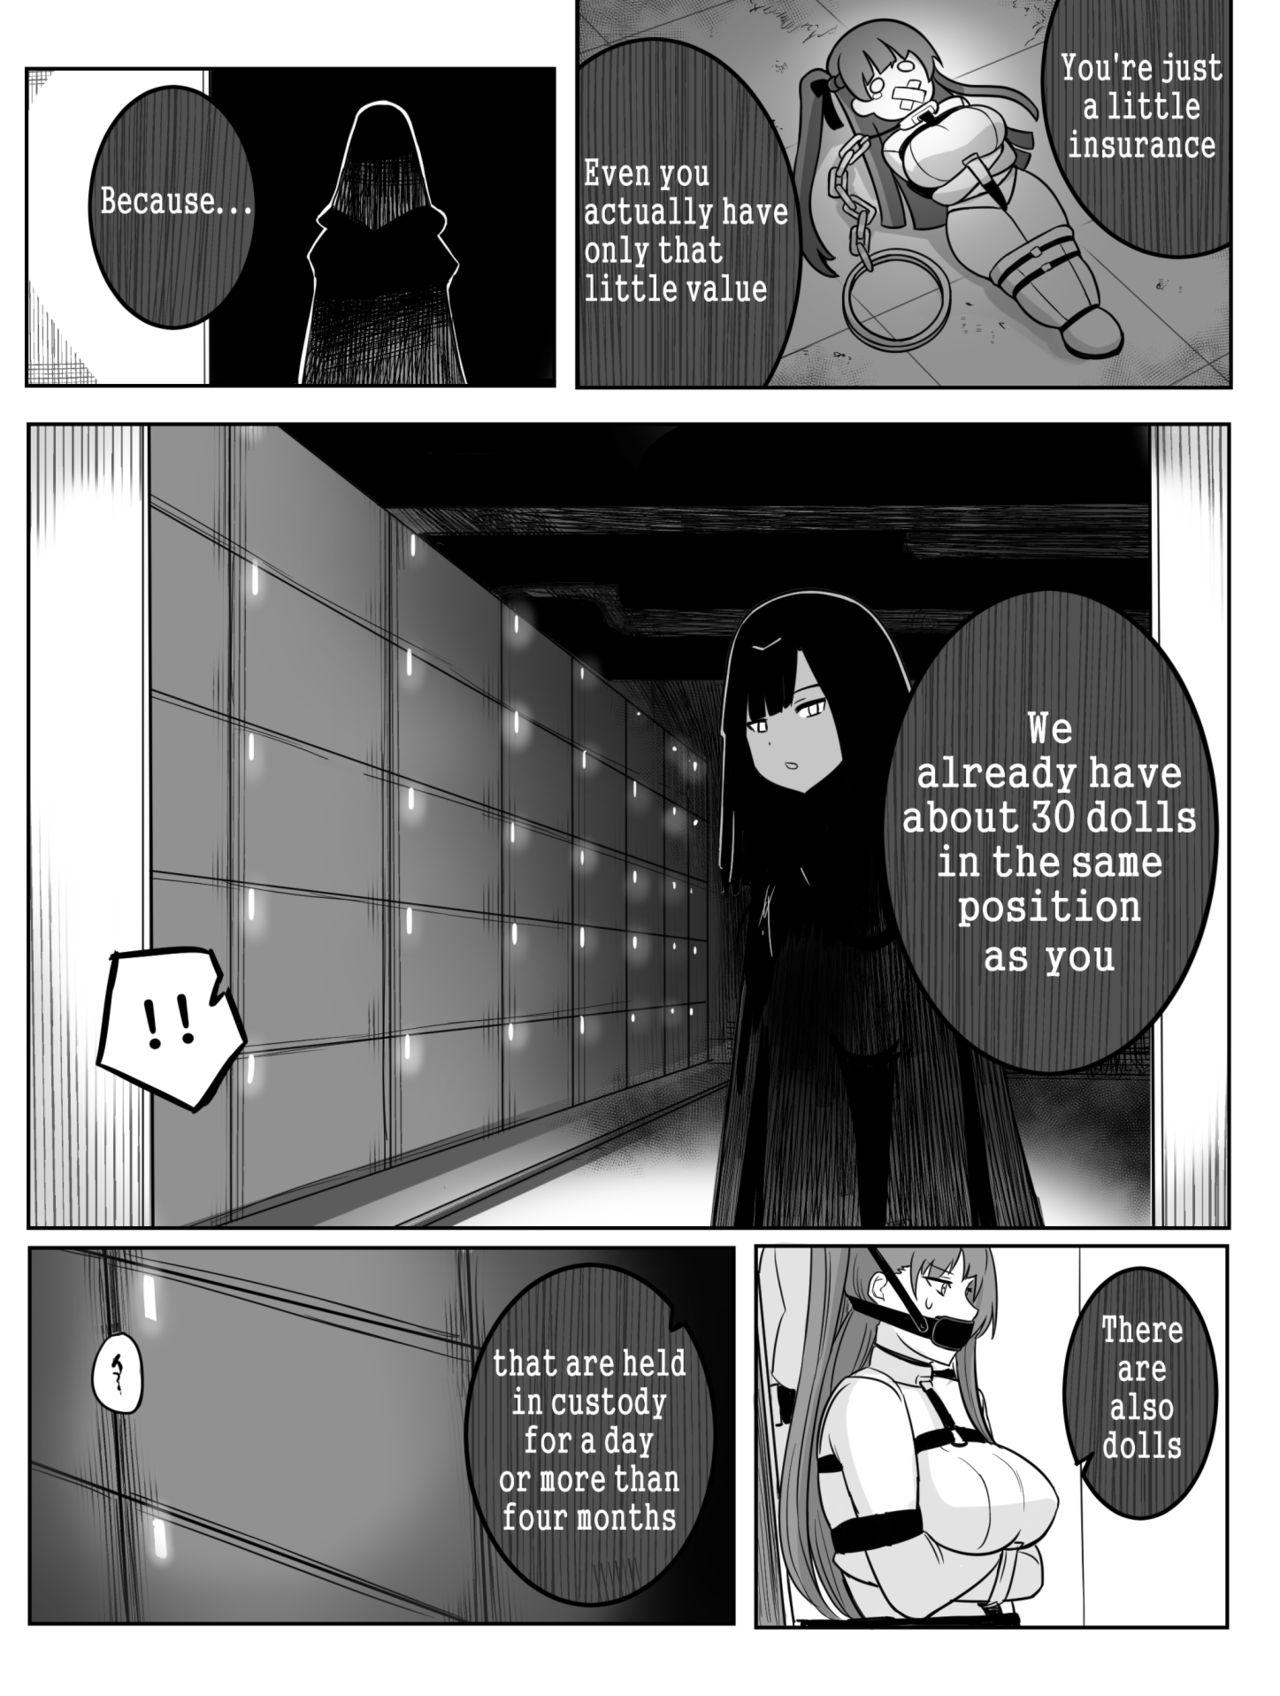 Dick Lost Dolls - Girls frontline Porno 18 - Page 6